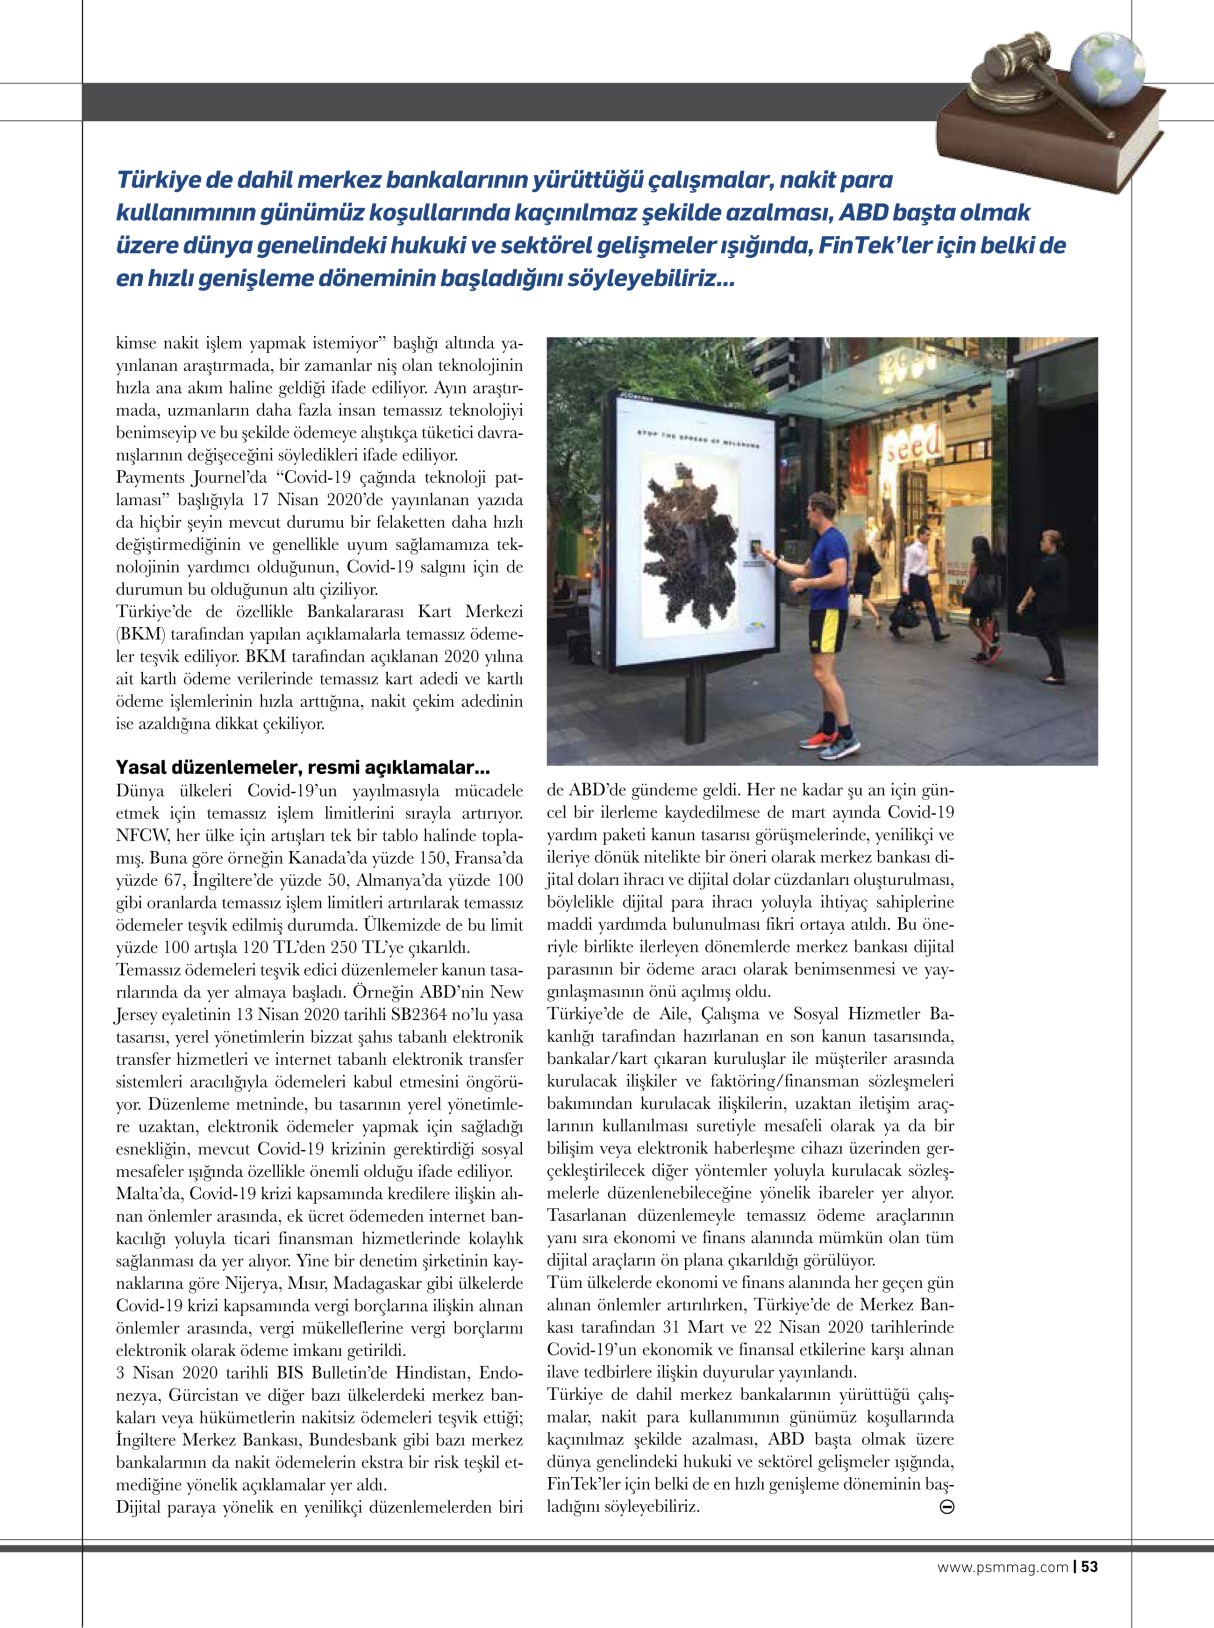 Payment Systems Magazine 2